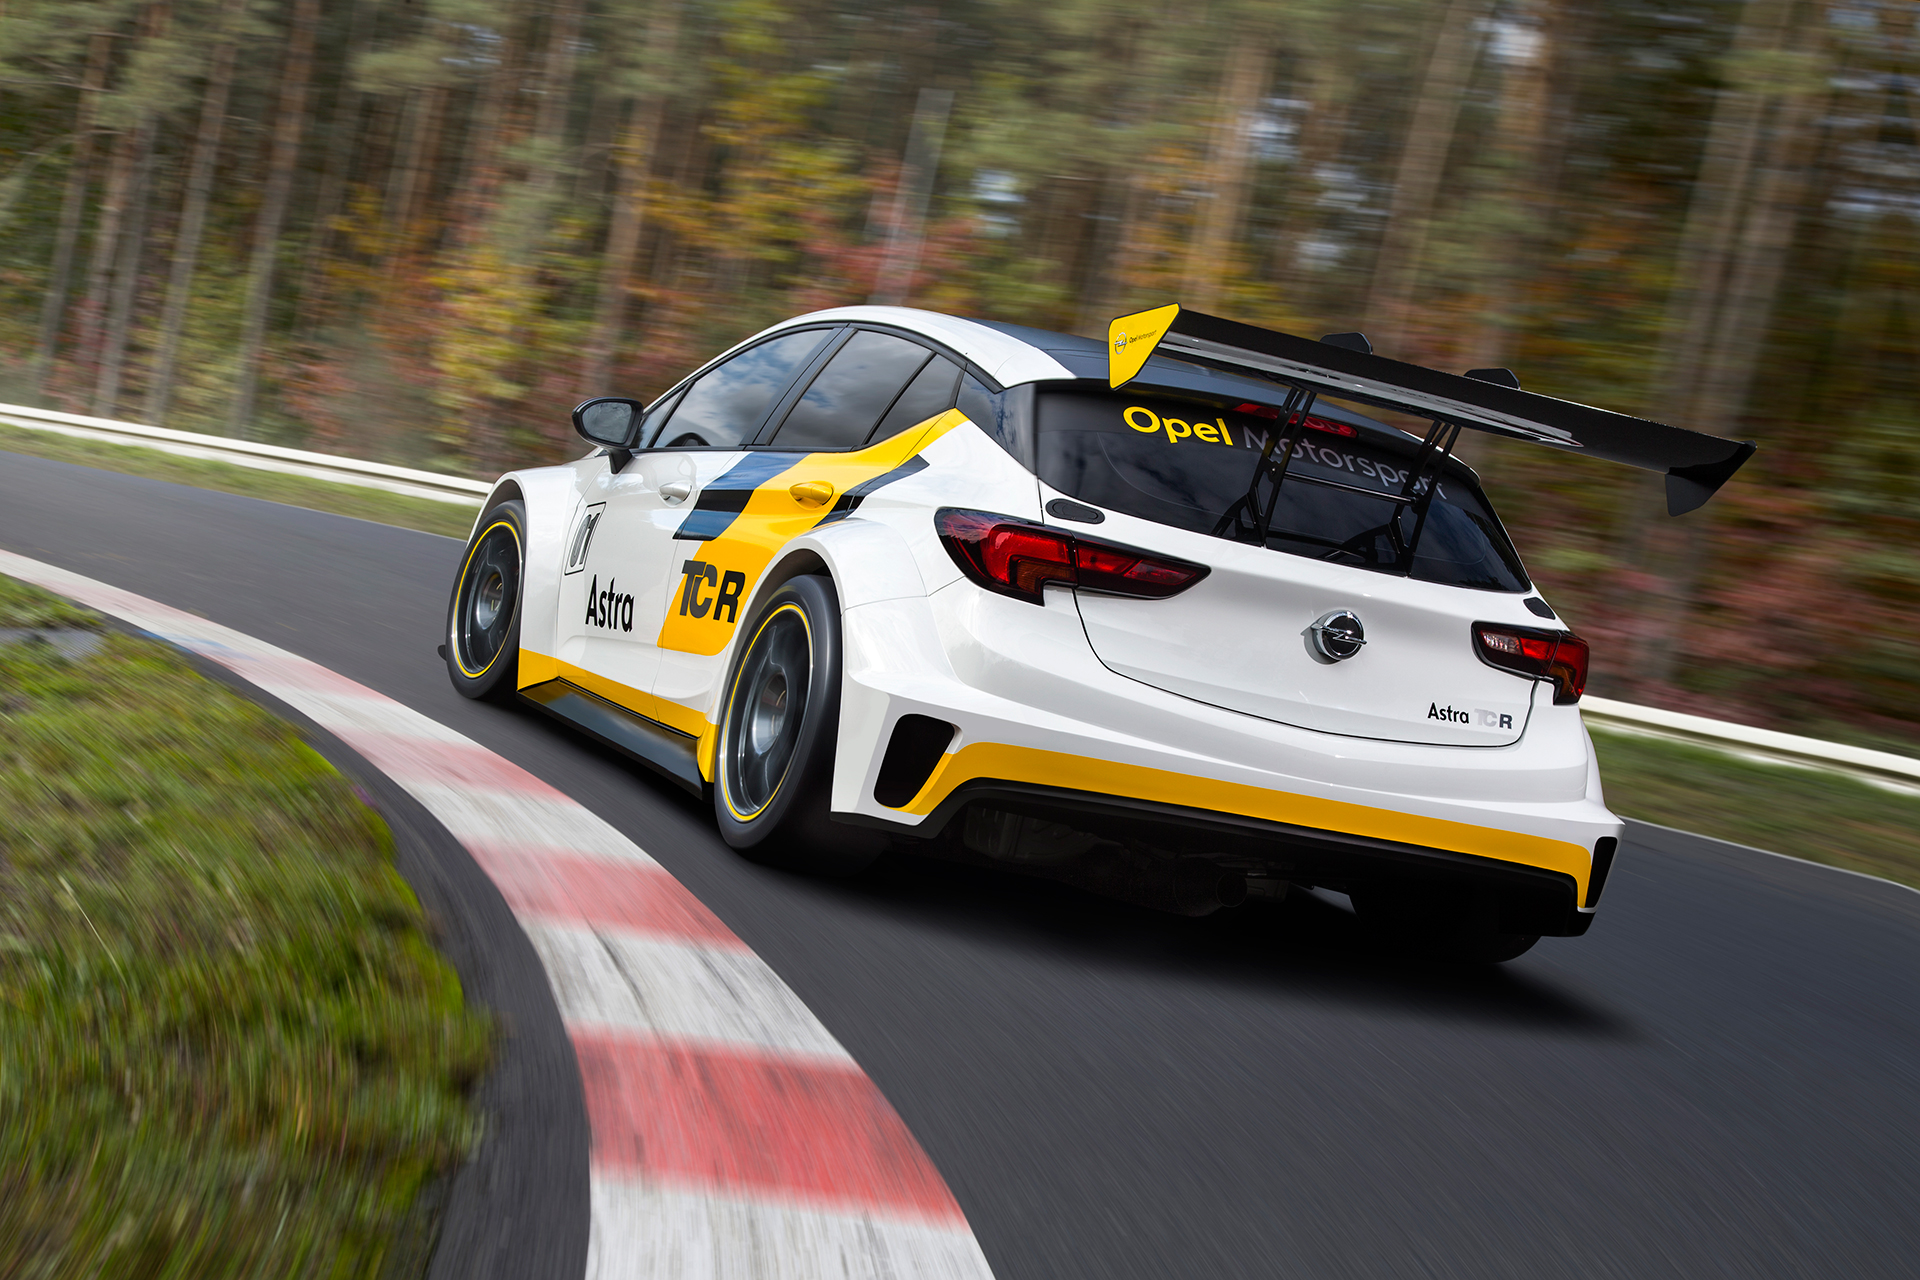 Opel Astra TCR - 2015 - arrière / rear - Image - GM Company.